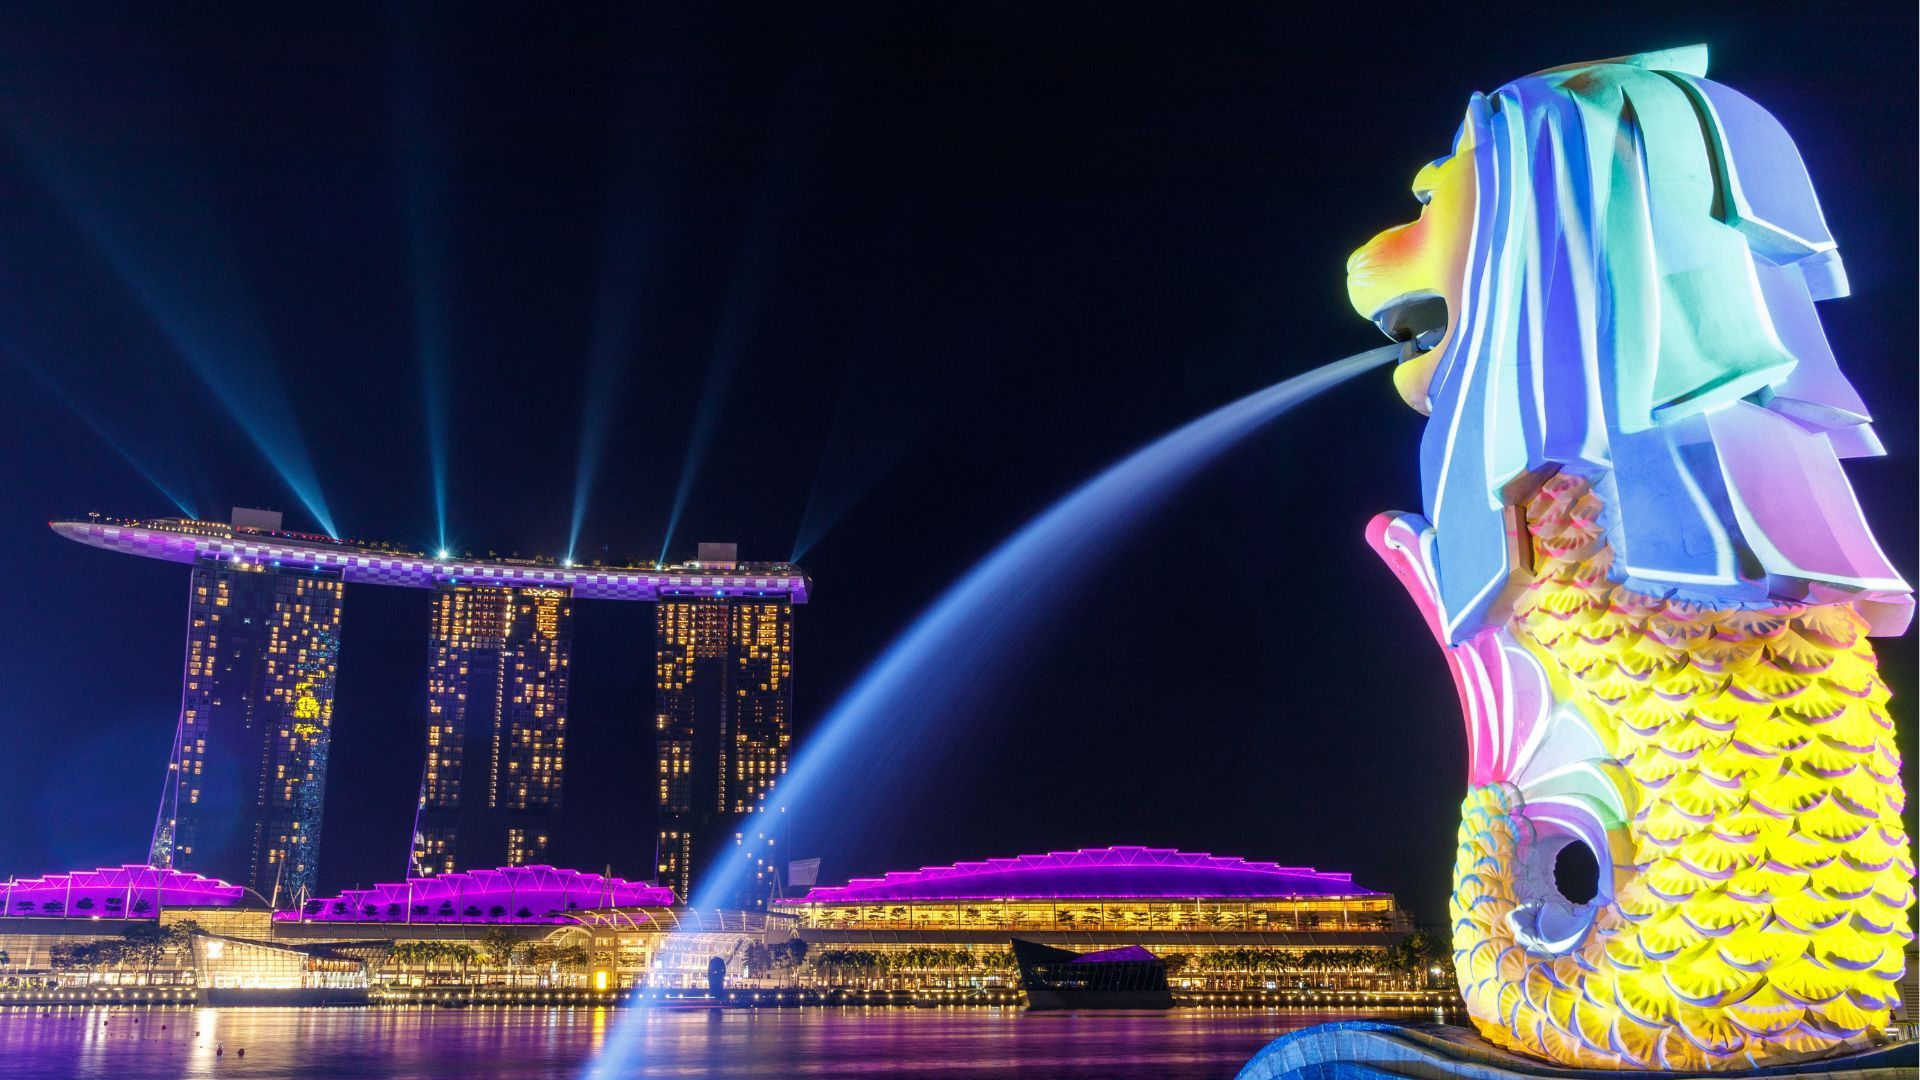 Singapore, Merlion Park Best places to visit in Asia